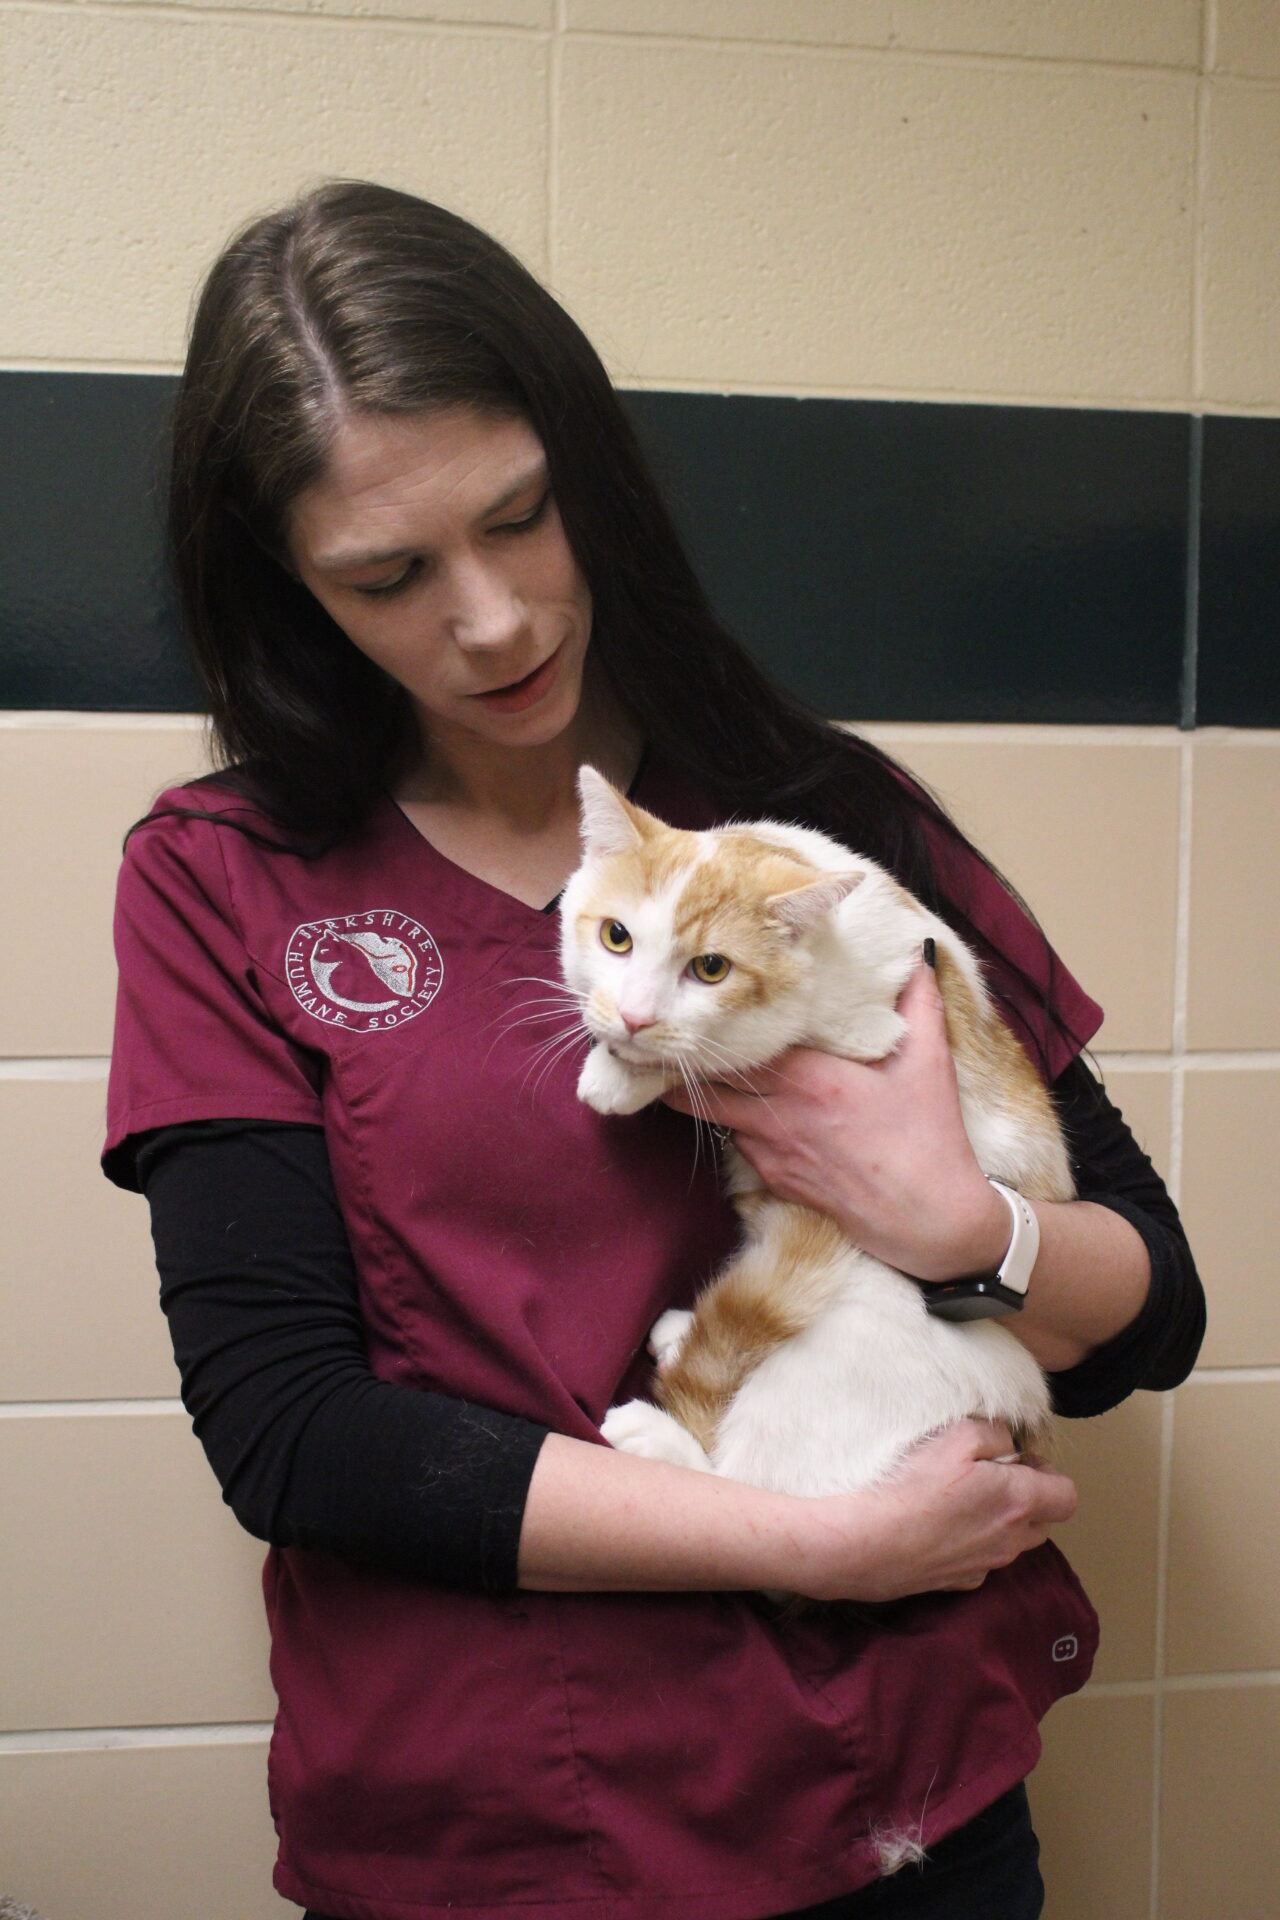 A woman with long dark hair in a maroon Berkshire Humane Society shirt holds a white cat with orange tiger markings